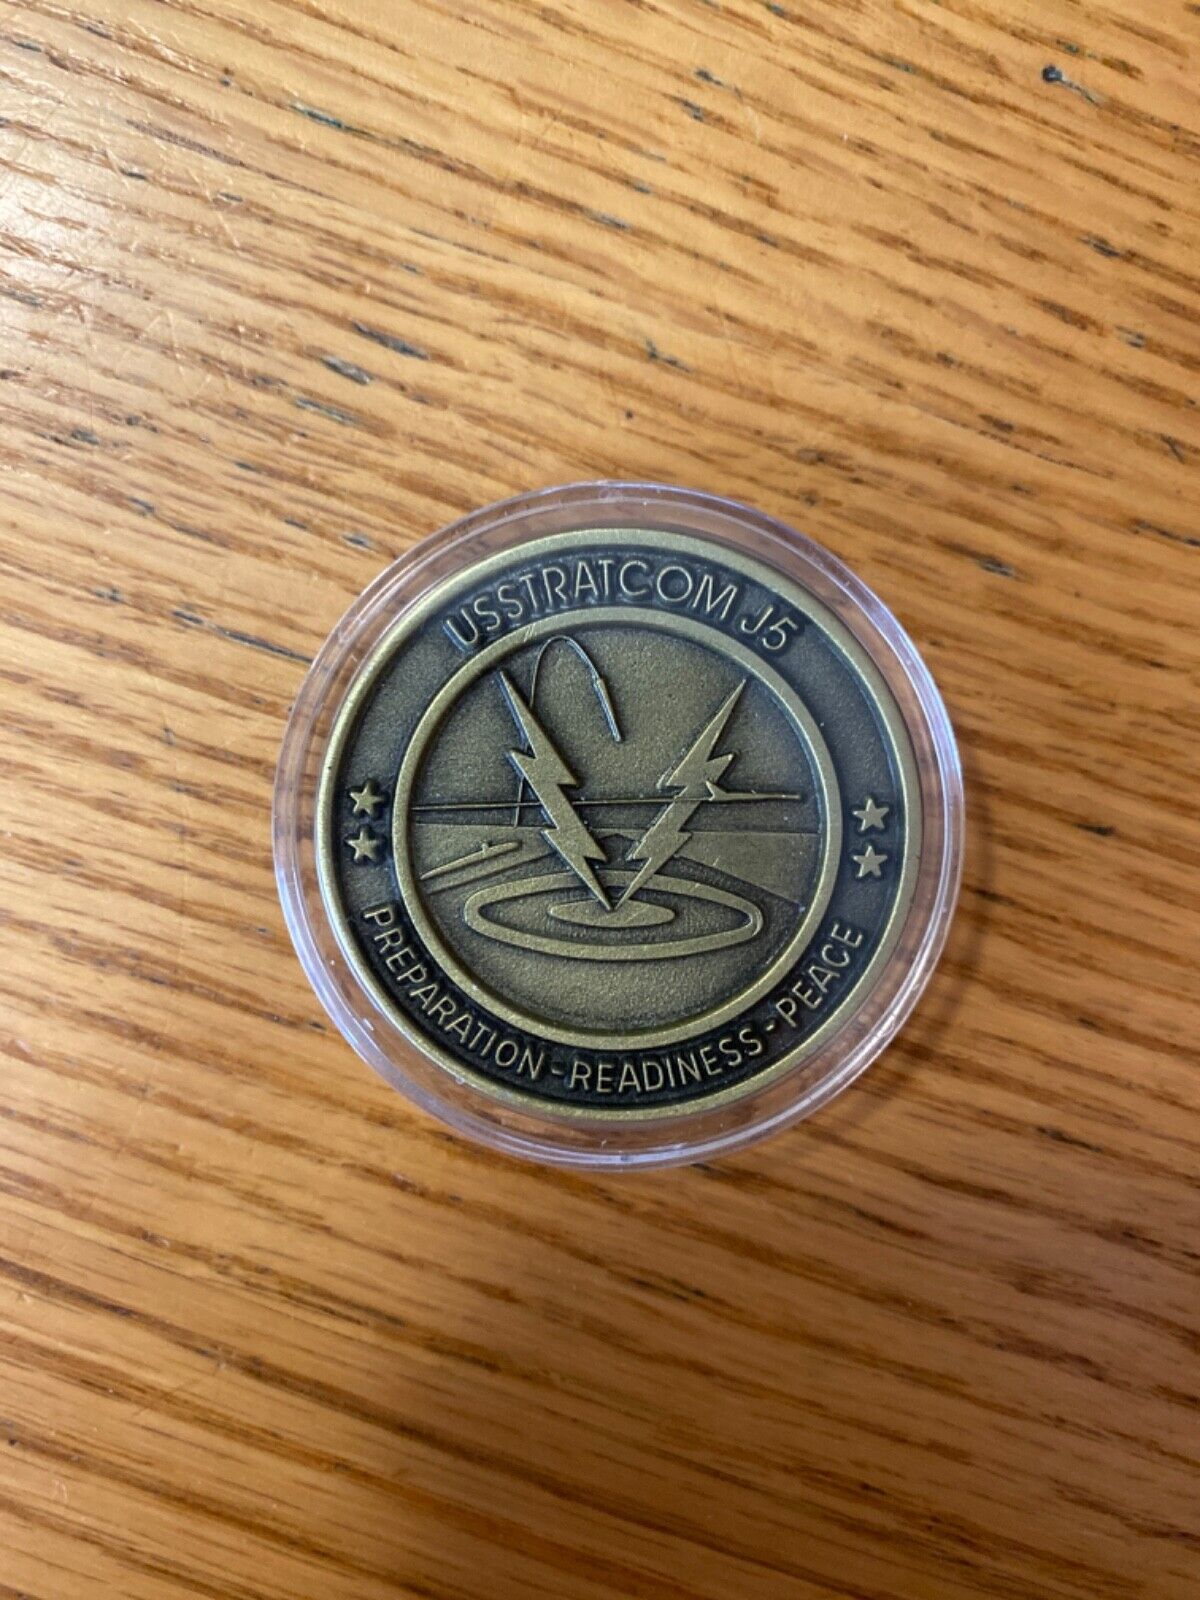 STRATCOM Challenge Coins Awarded by Sec. Rumsfeld on 9/11, Not Publicly Released